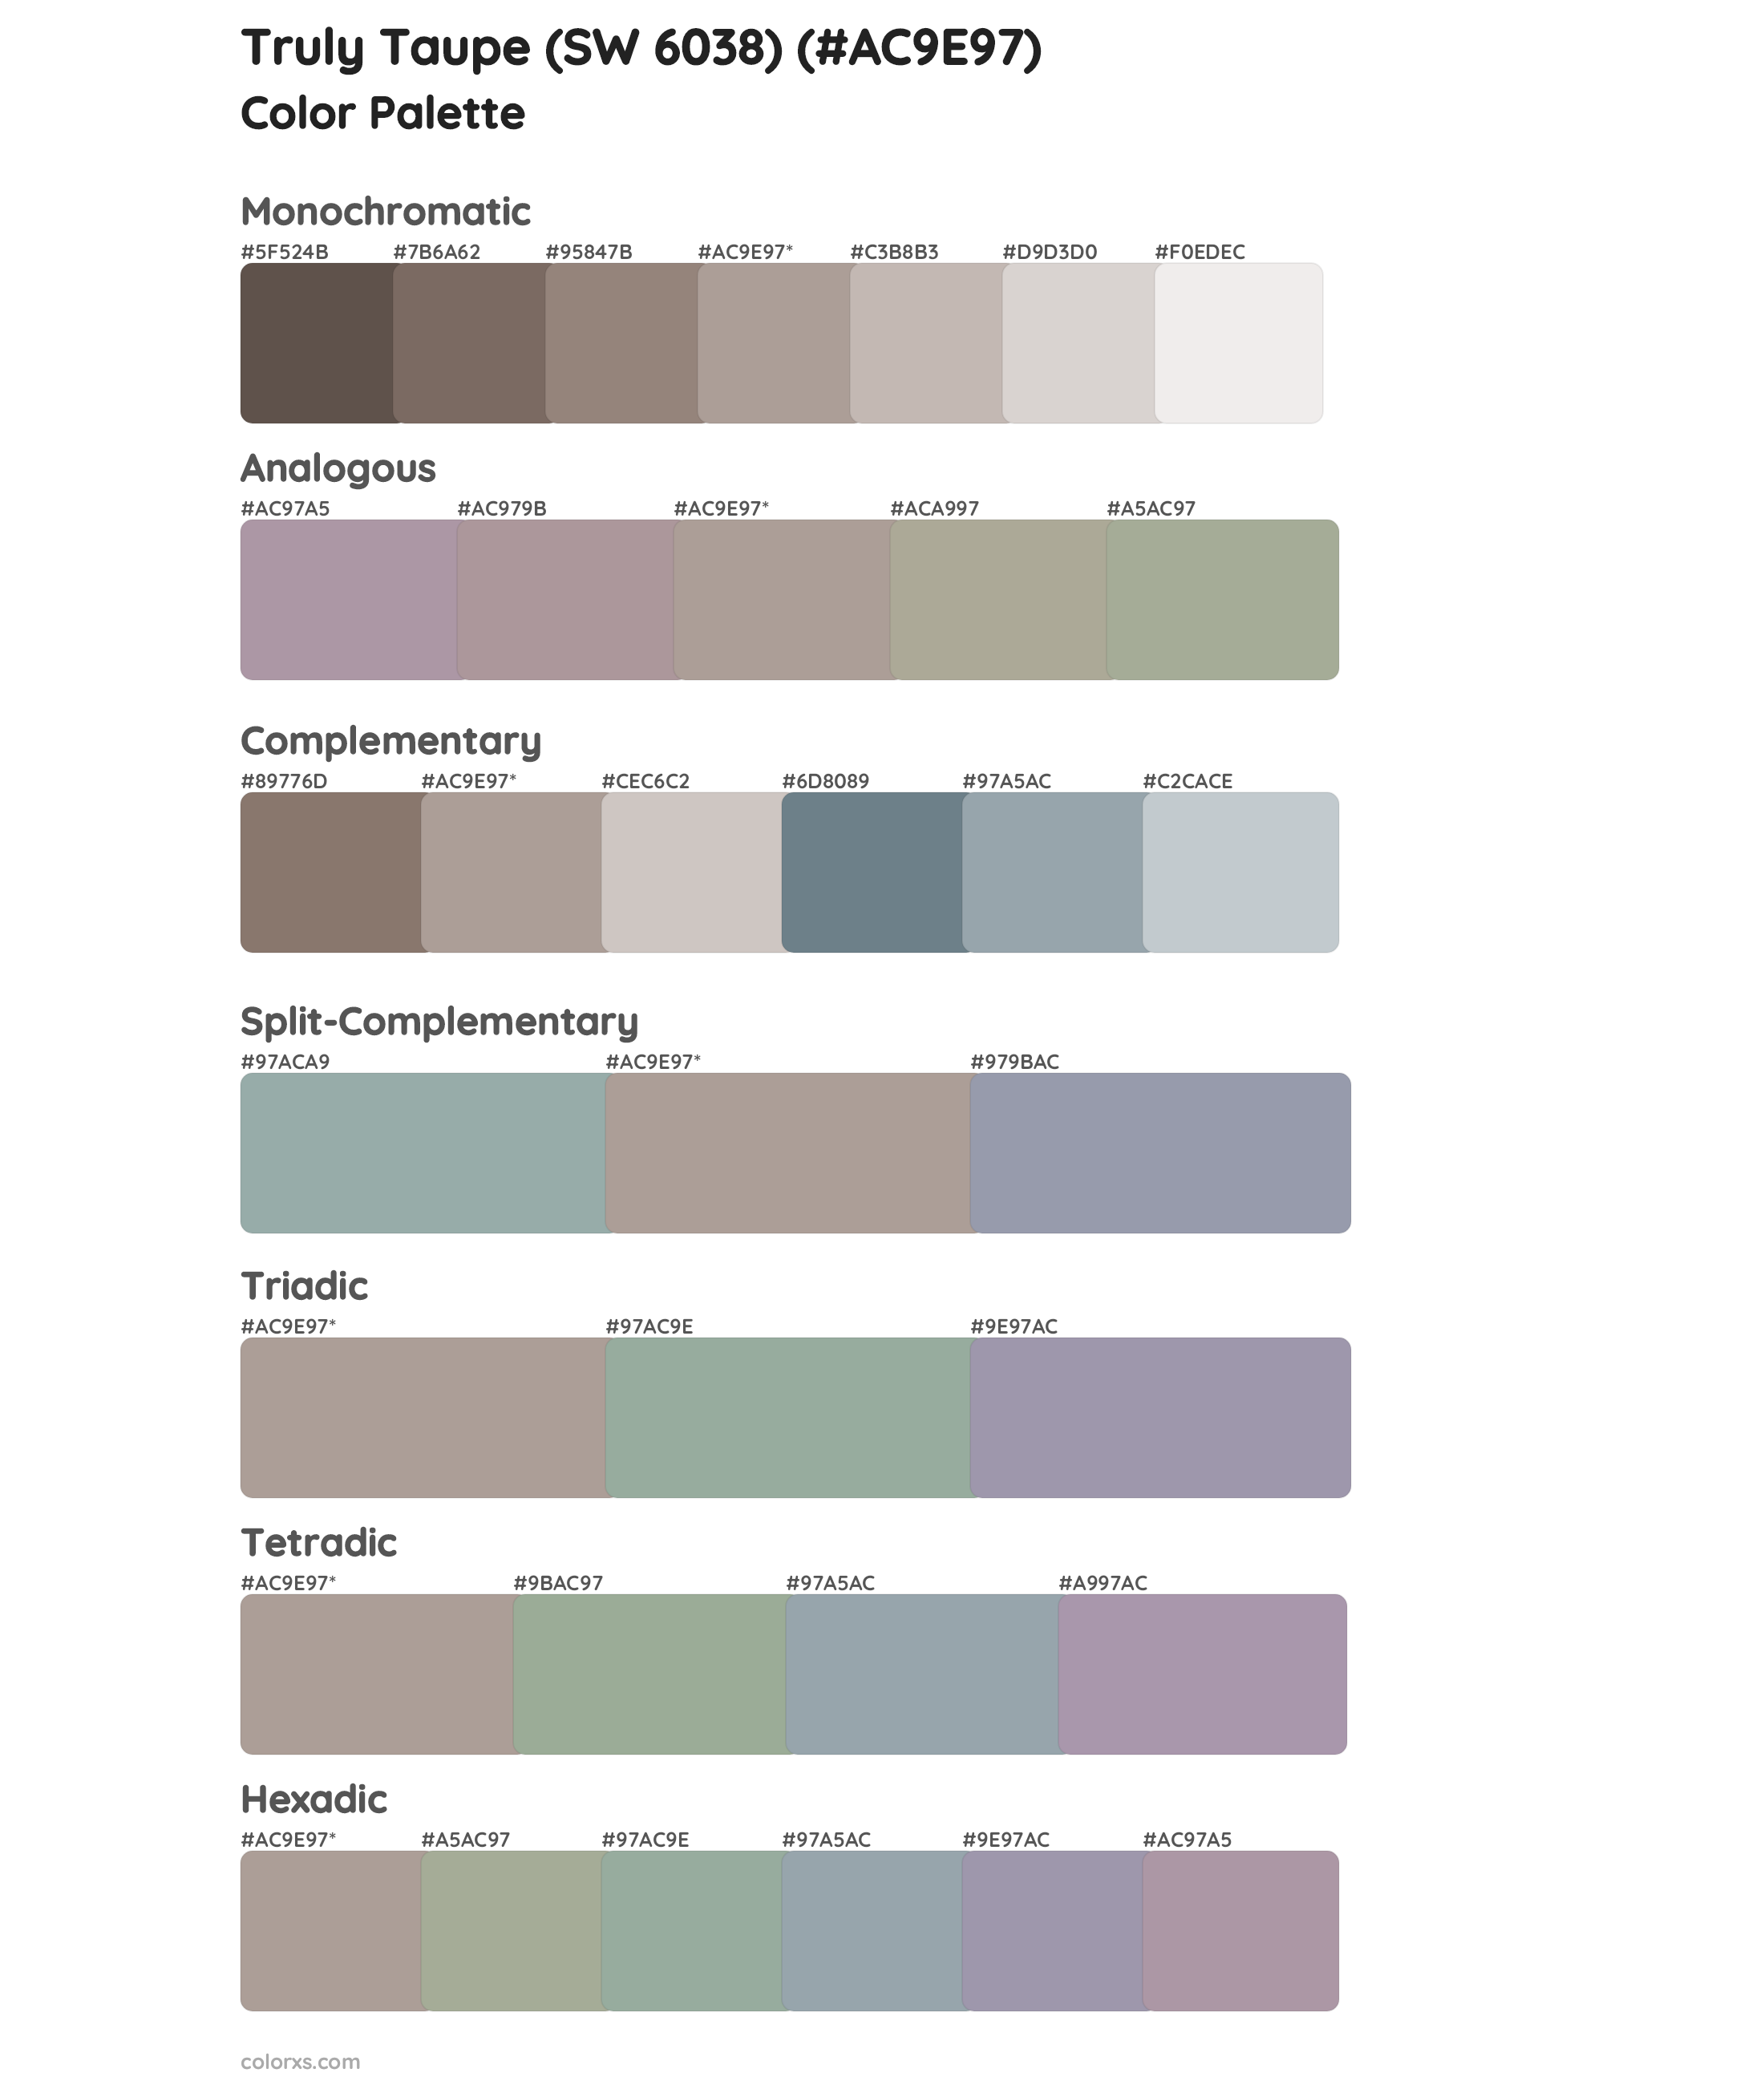 Truly Taupe (SW 6038) Color Scheme Palettes